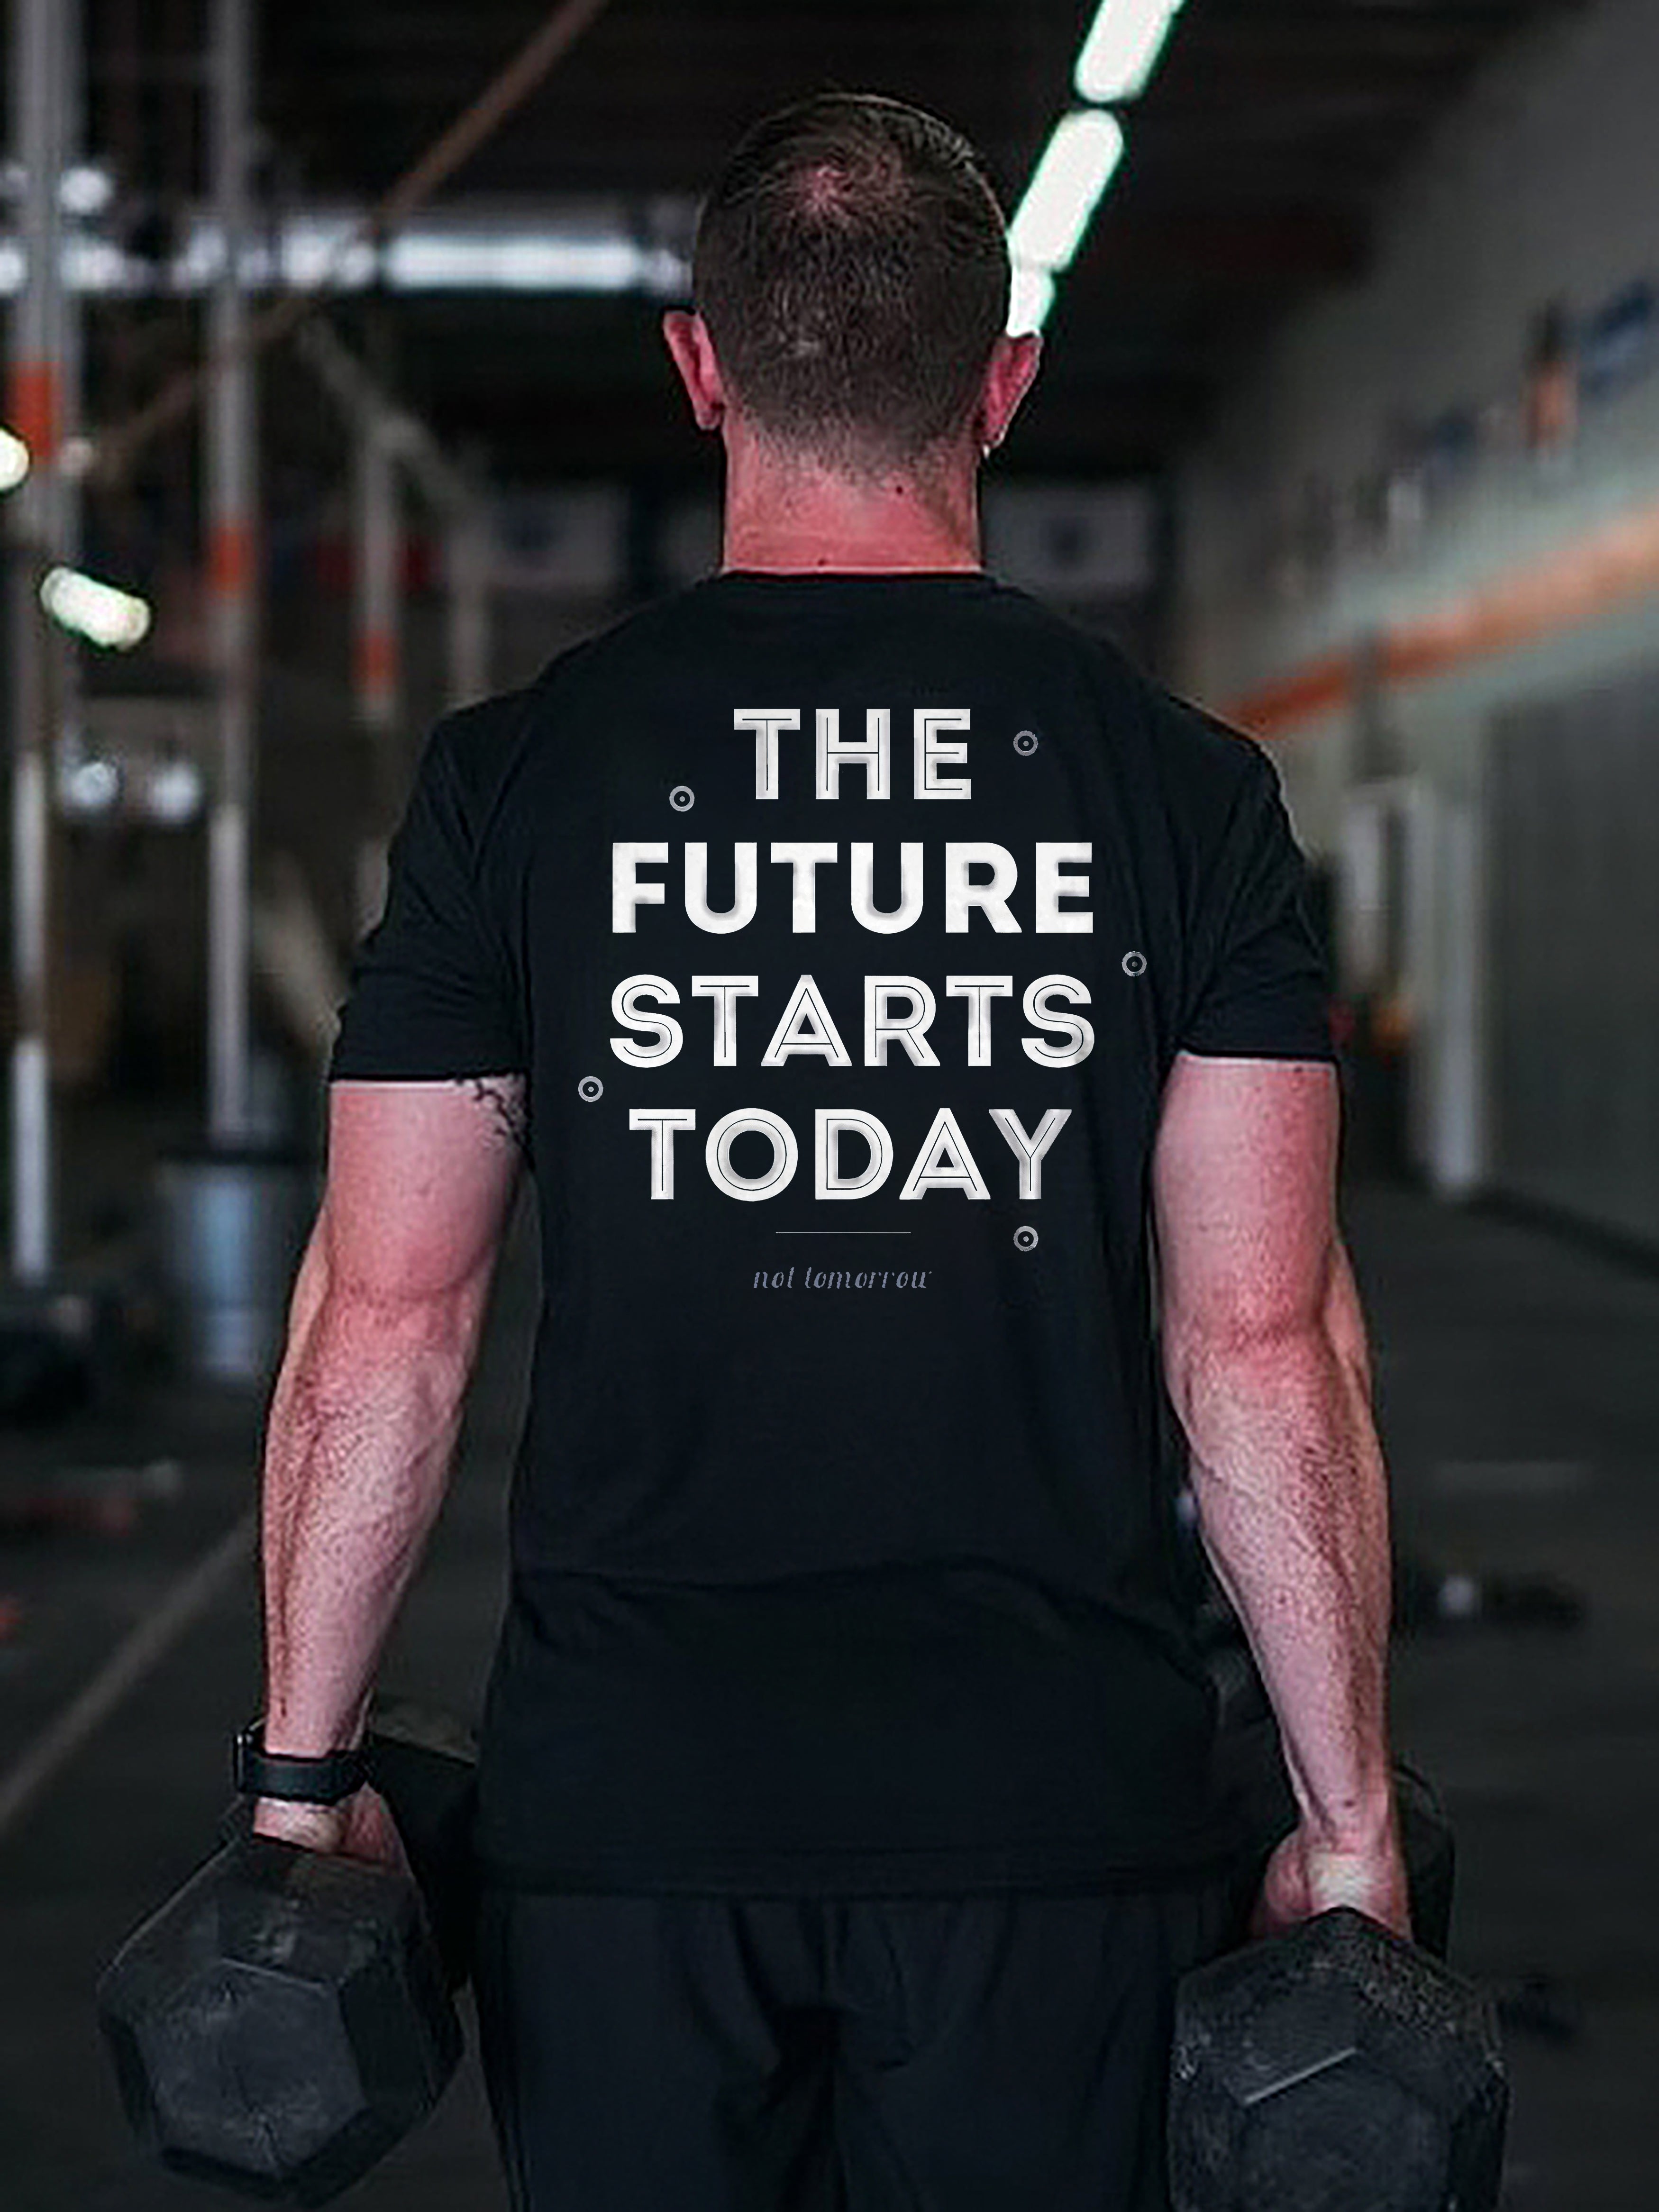 The Future Starts Today Printed Men's T-shirt